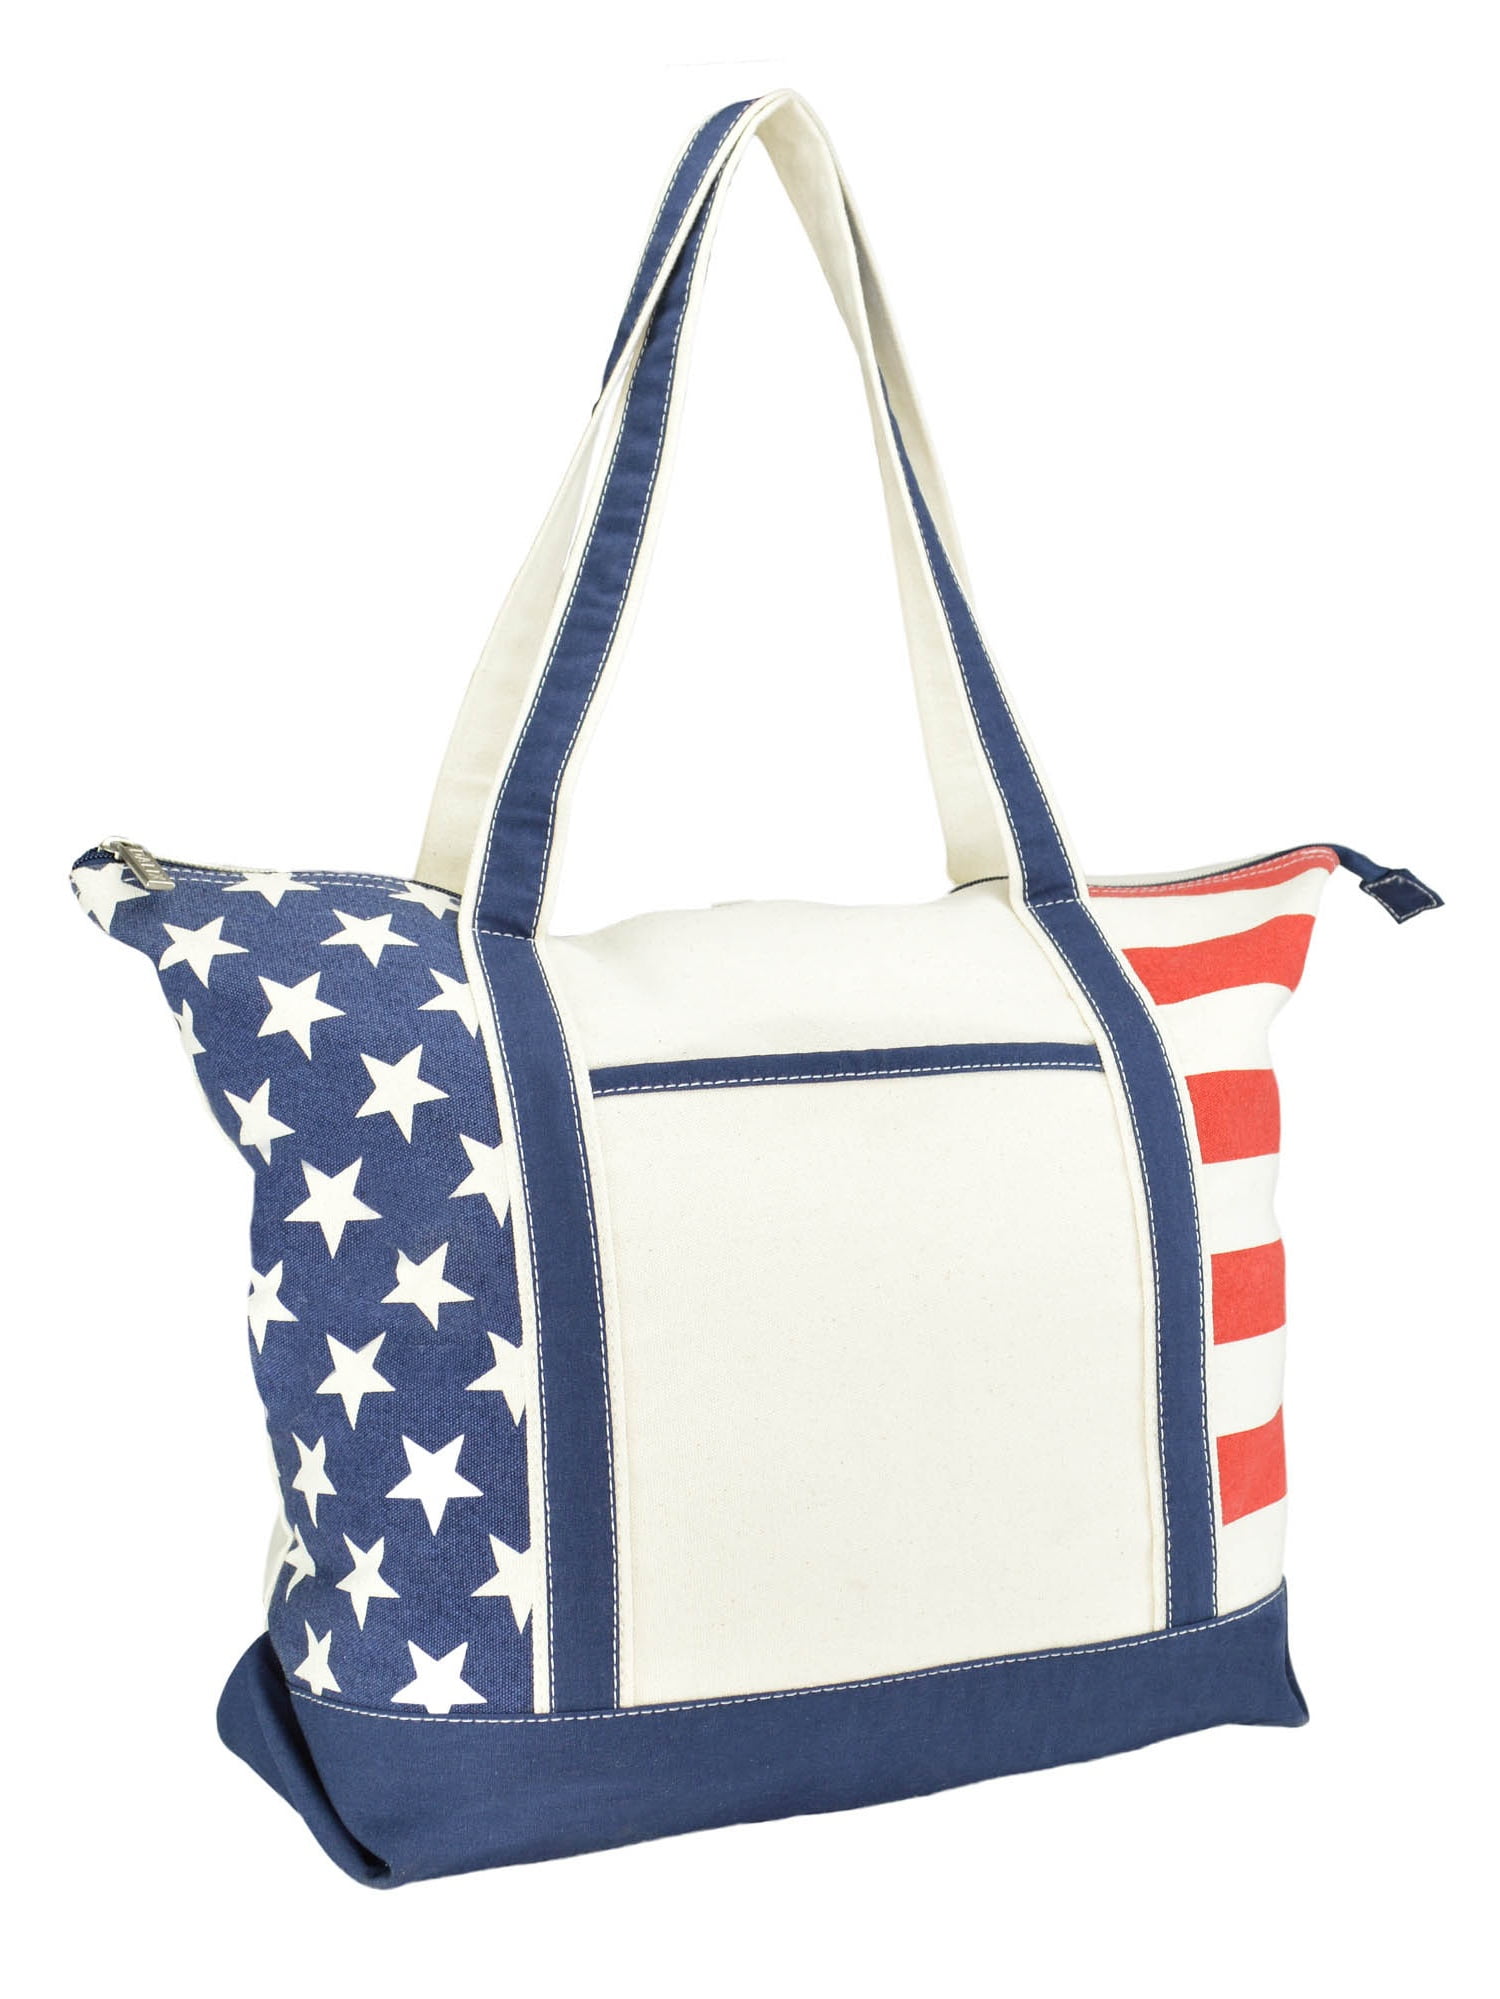 Personalized Large America Flag Designed Woven Handles Jute TOTE Bag July 4th 